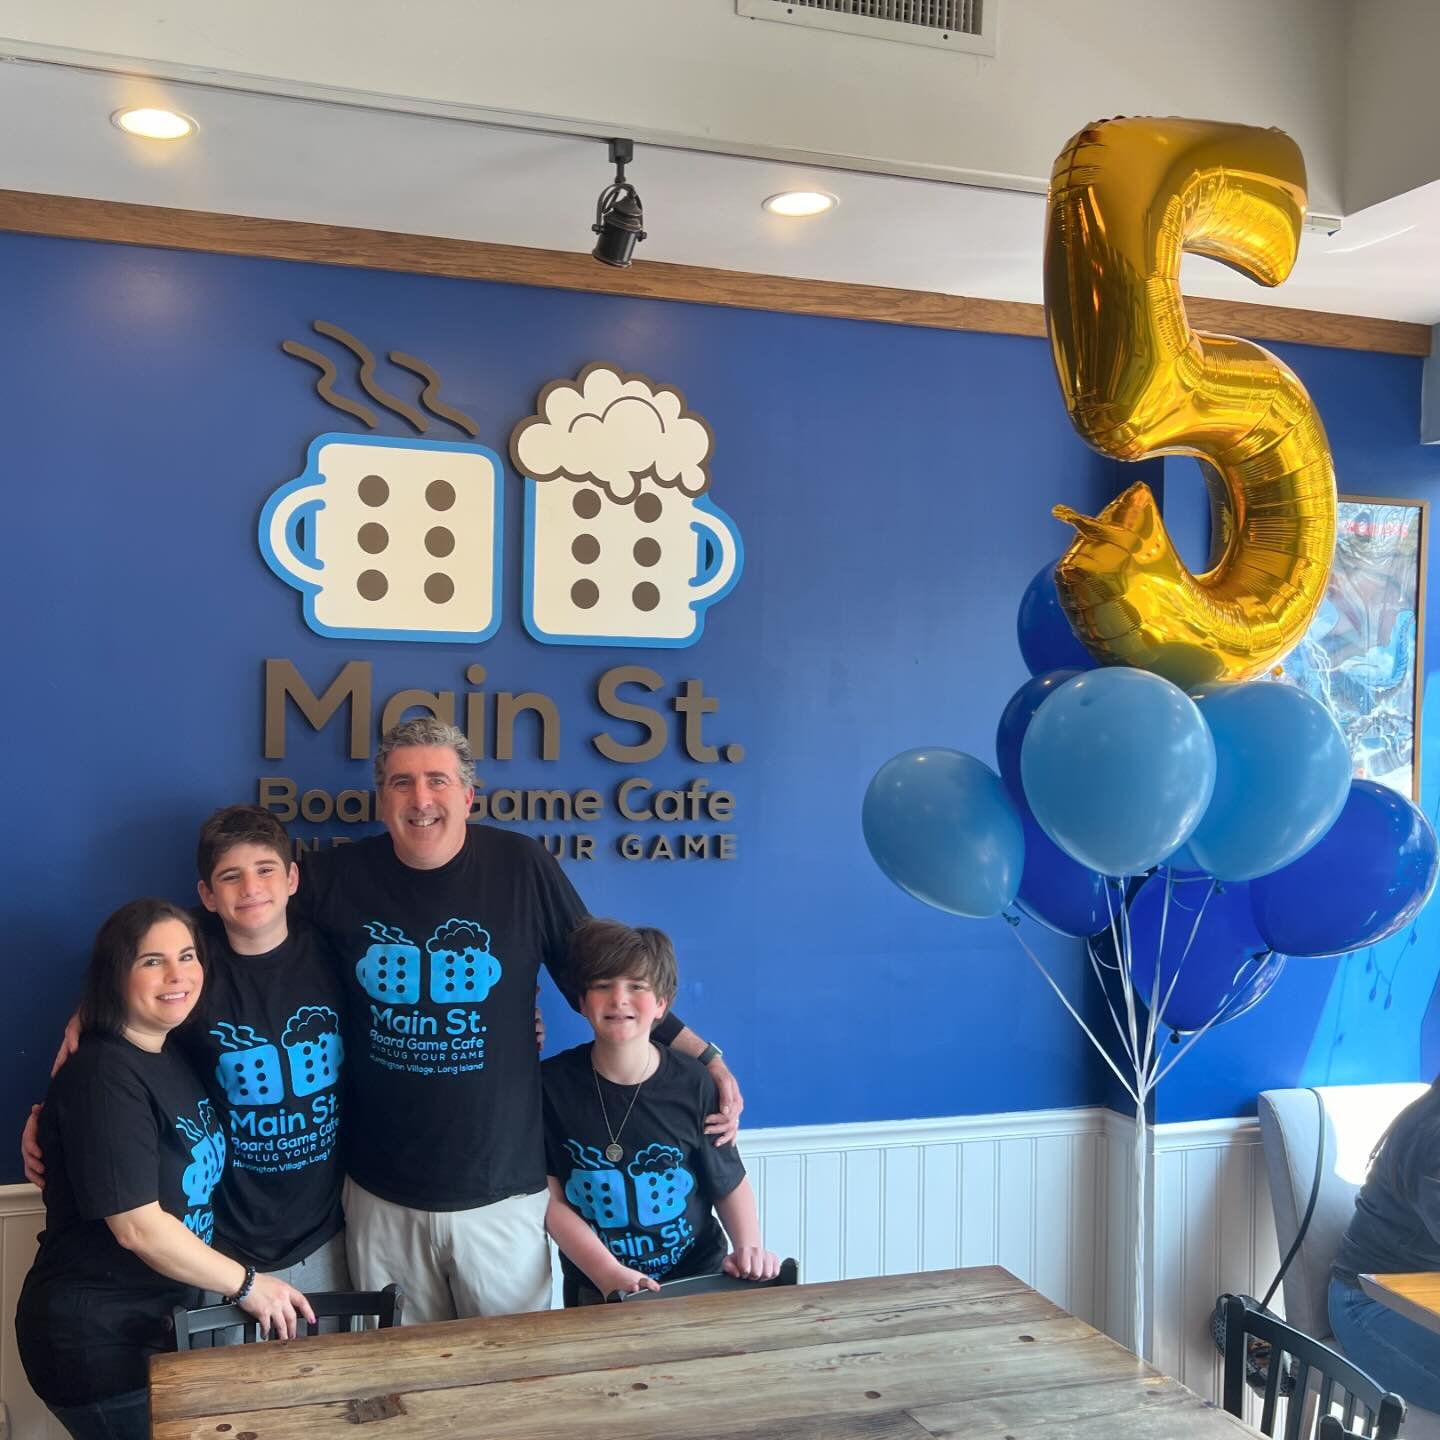 Board Games, fun, friends&hellip;and family! Thanks to everyone who made our 5th anniversary celebration so special!

#mainstboardgamecafe #flgs #Unplugyourgame #screenfreekids #familyfun #nassaucounty #suffolkcounty #boardgames #huntington #huntingt